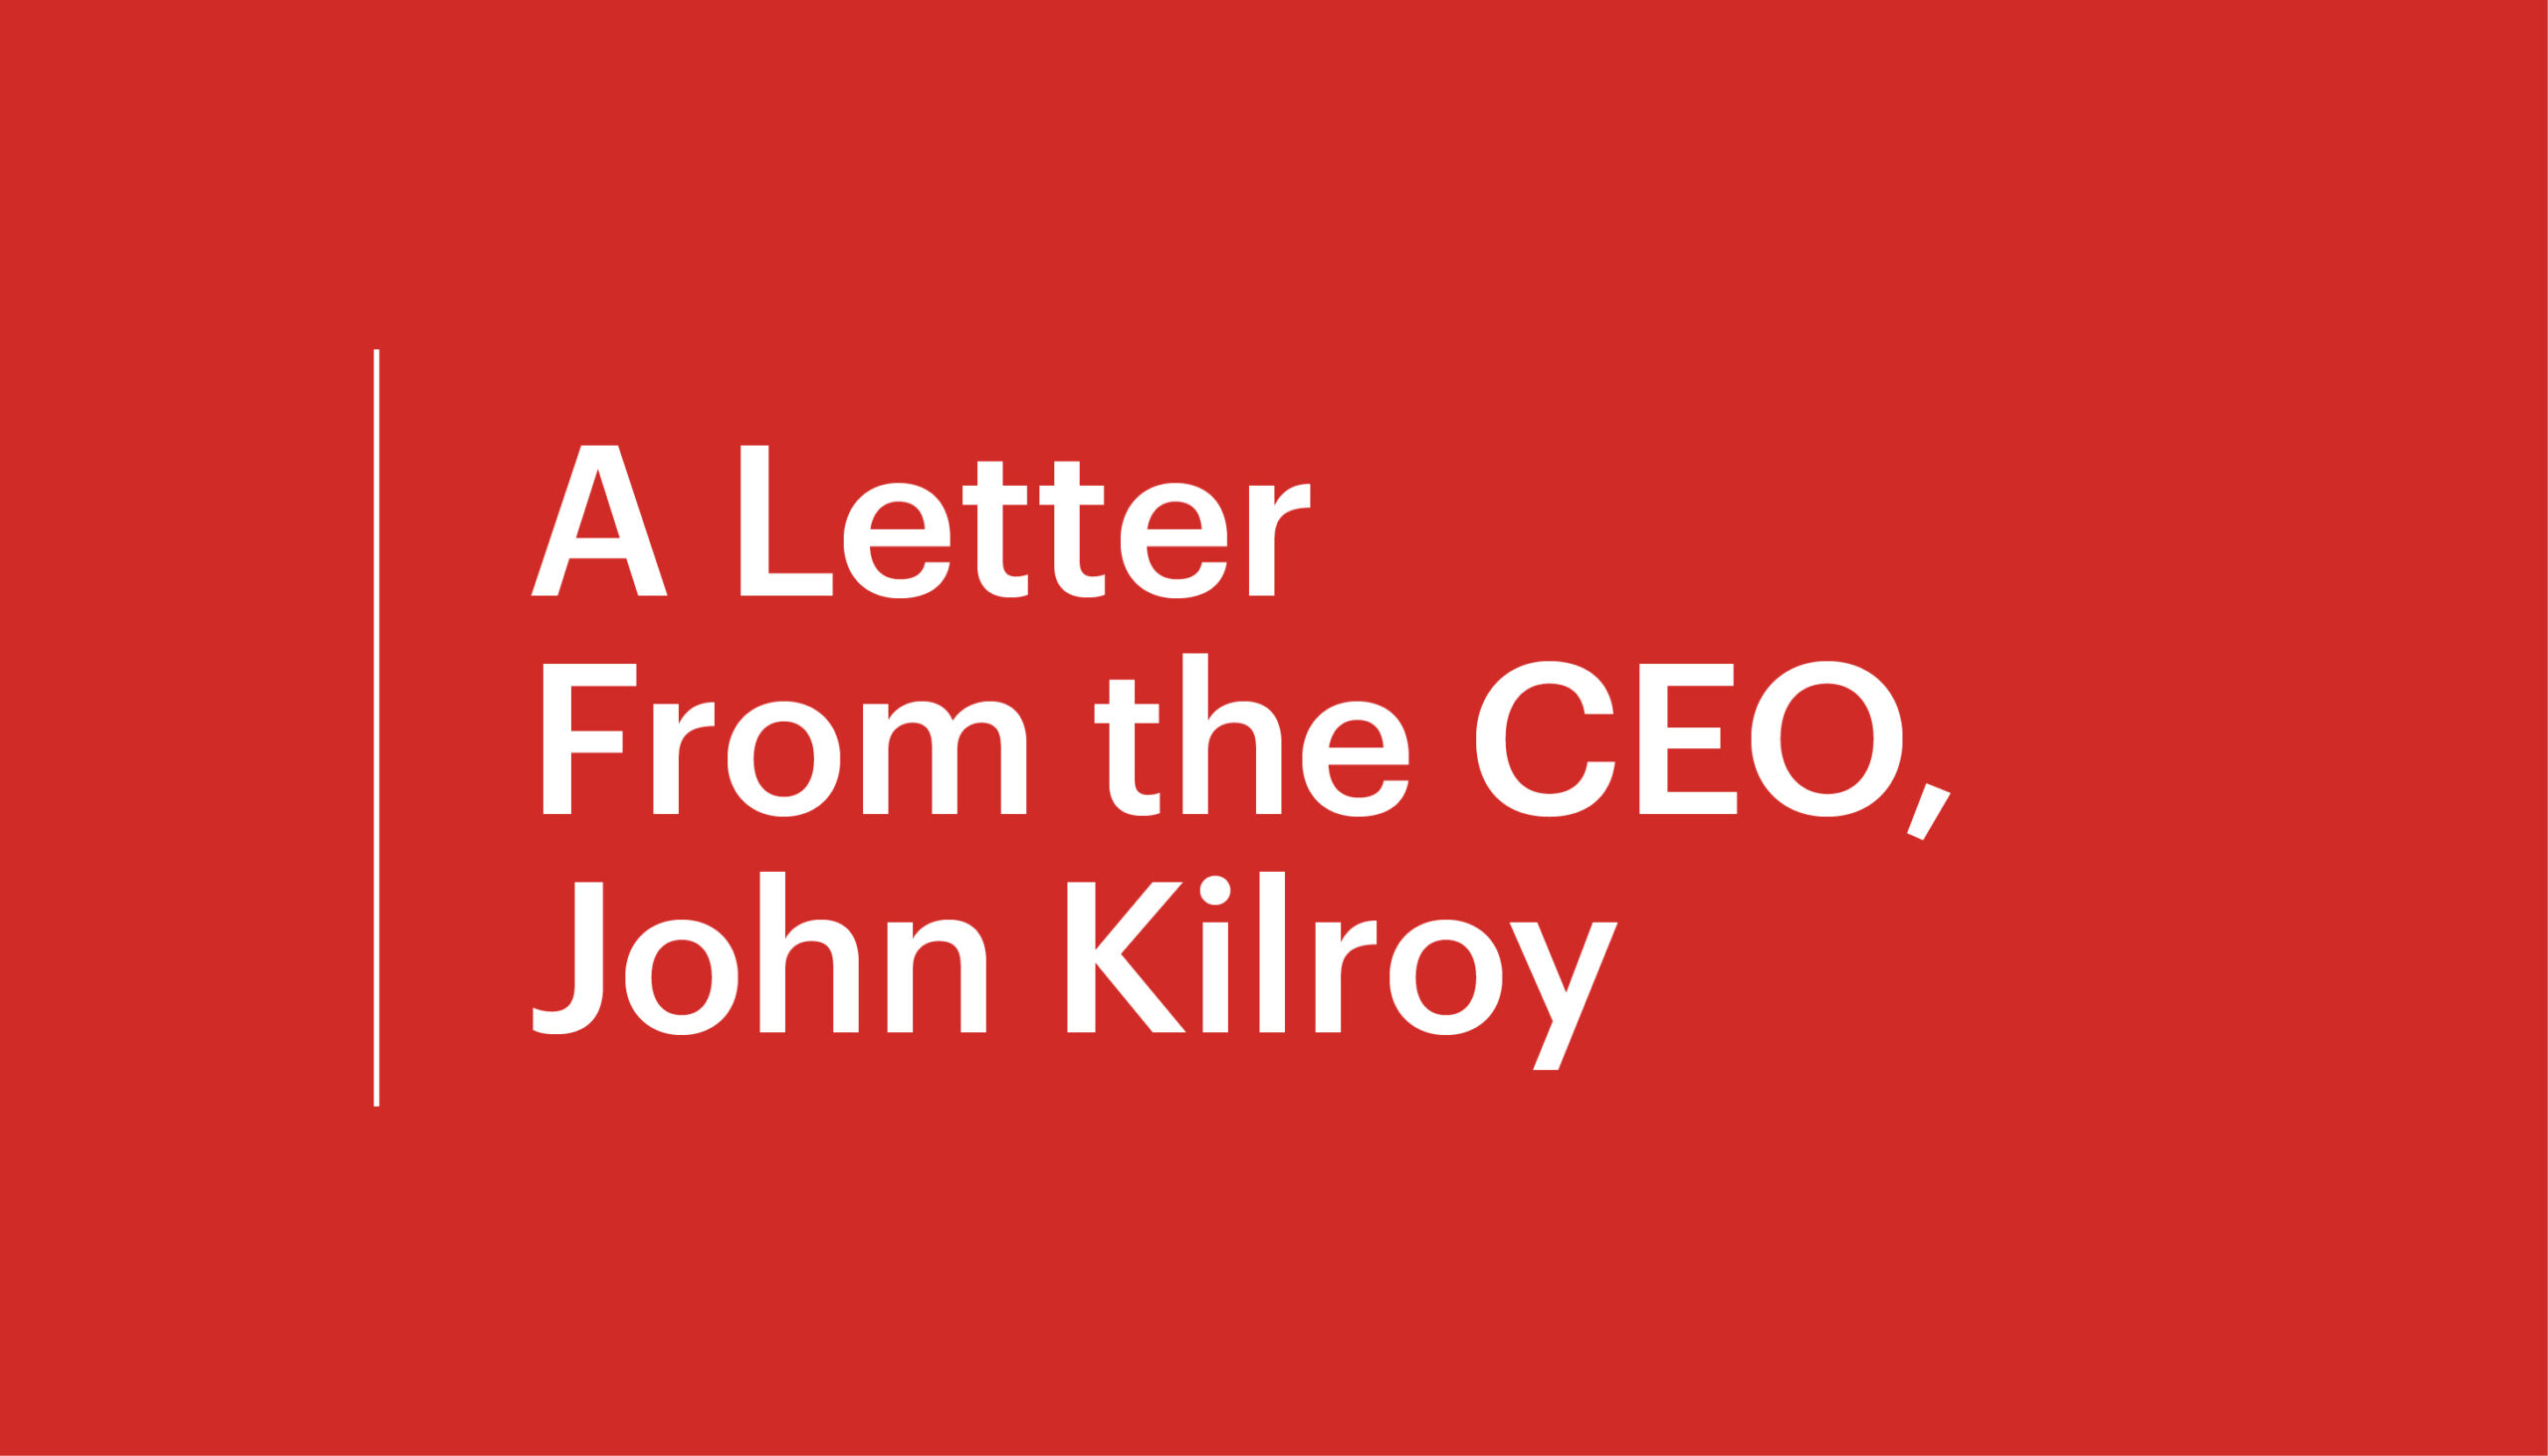 CEO Letter Image_02